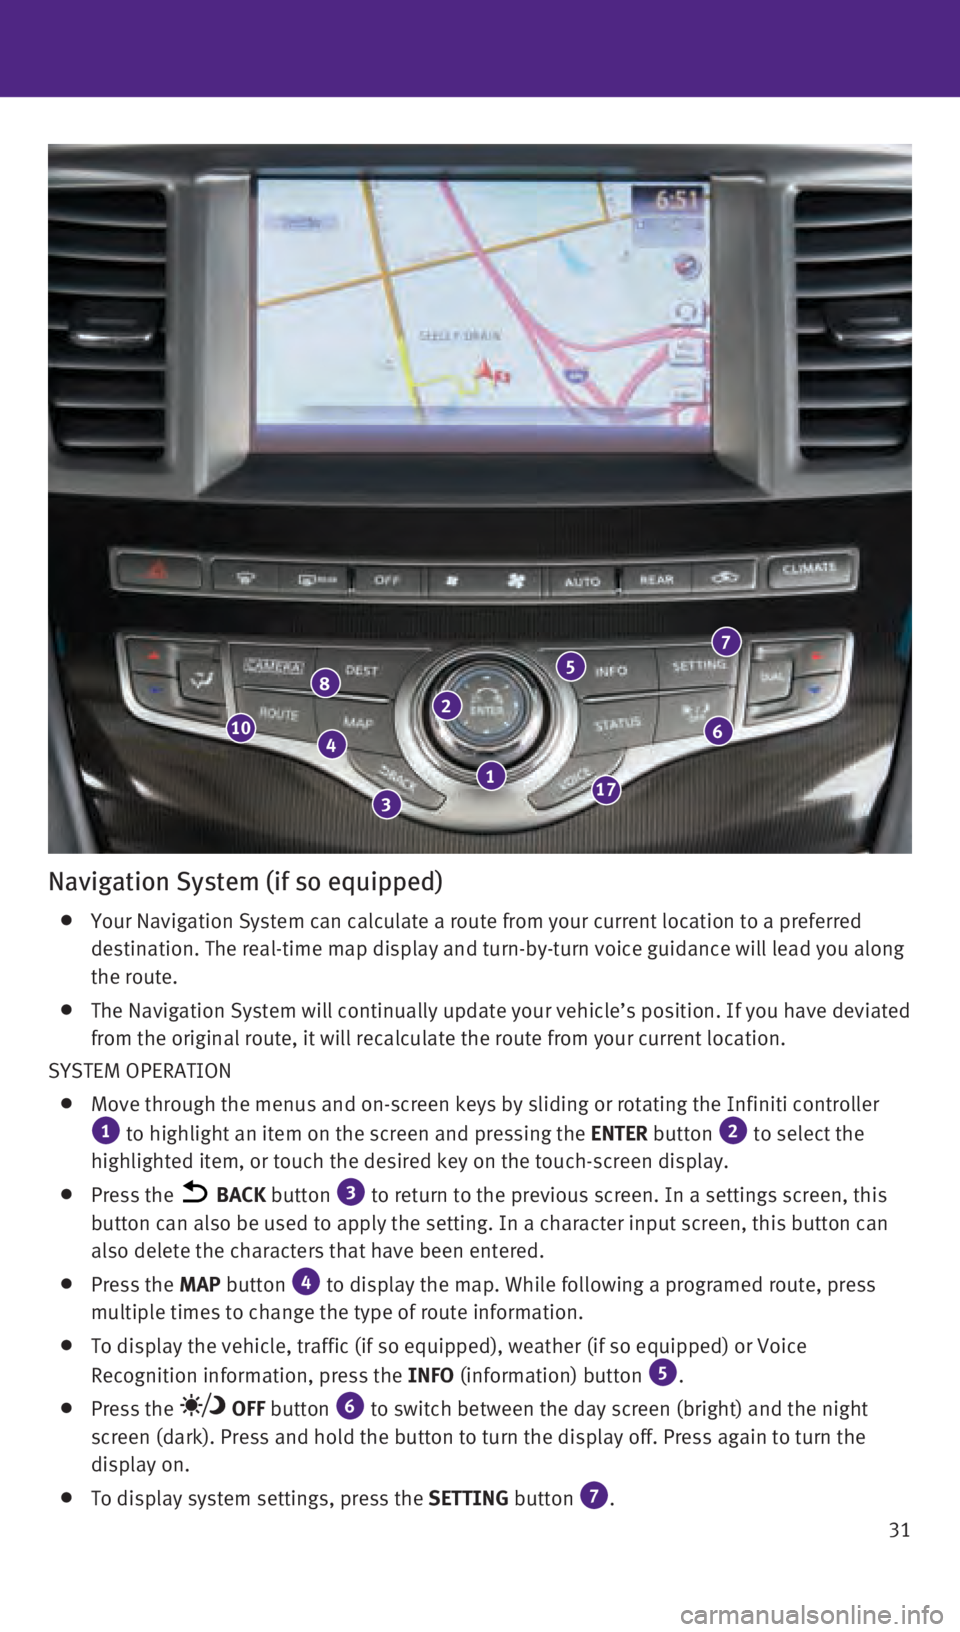 INFINITI QX60 2016  Quick Reference Guide 31
2
3
46
8
17
10
7
1
Navigation System (if so equipped)
   Your Navigation System can calculate a route from your current location \
to a preferred 
destination. The real-time map display and turn-by